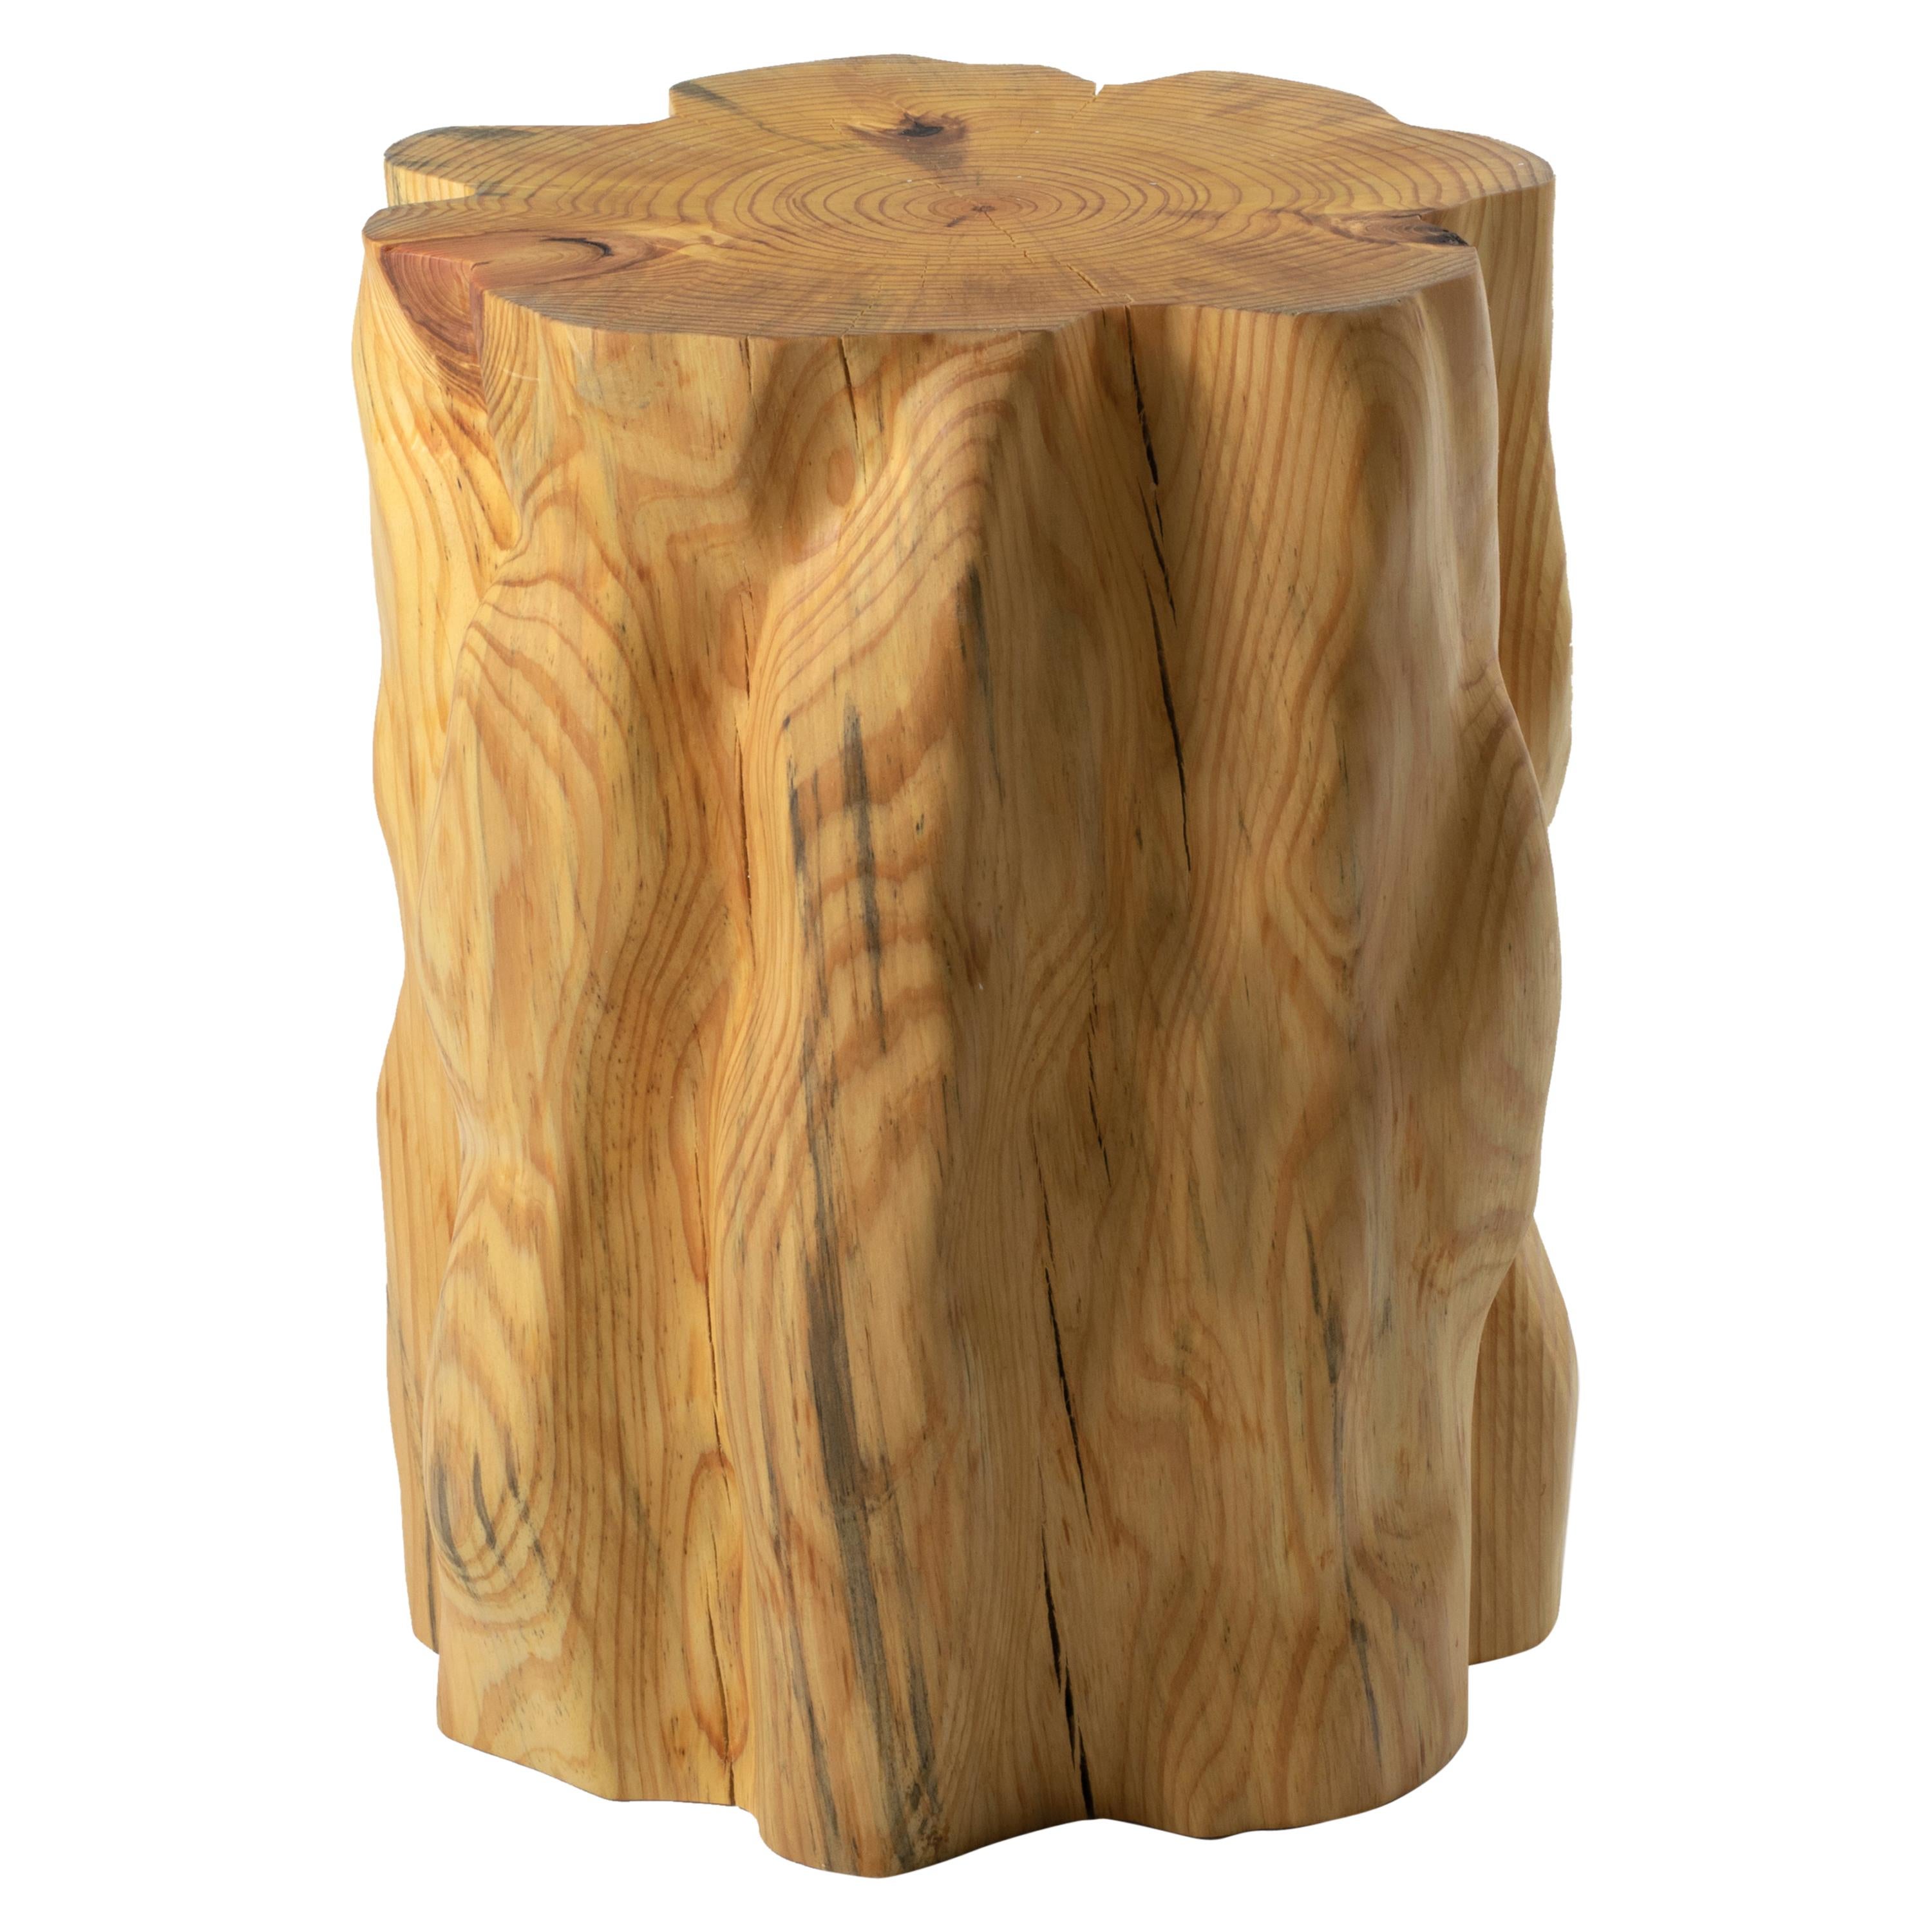 Bark Scale Stool #II by Timbur, Represented by Tuleste Factory For Sale